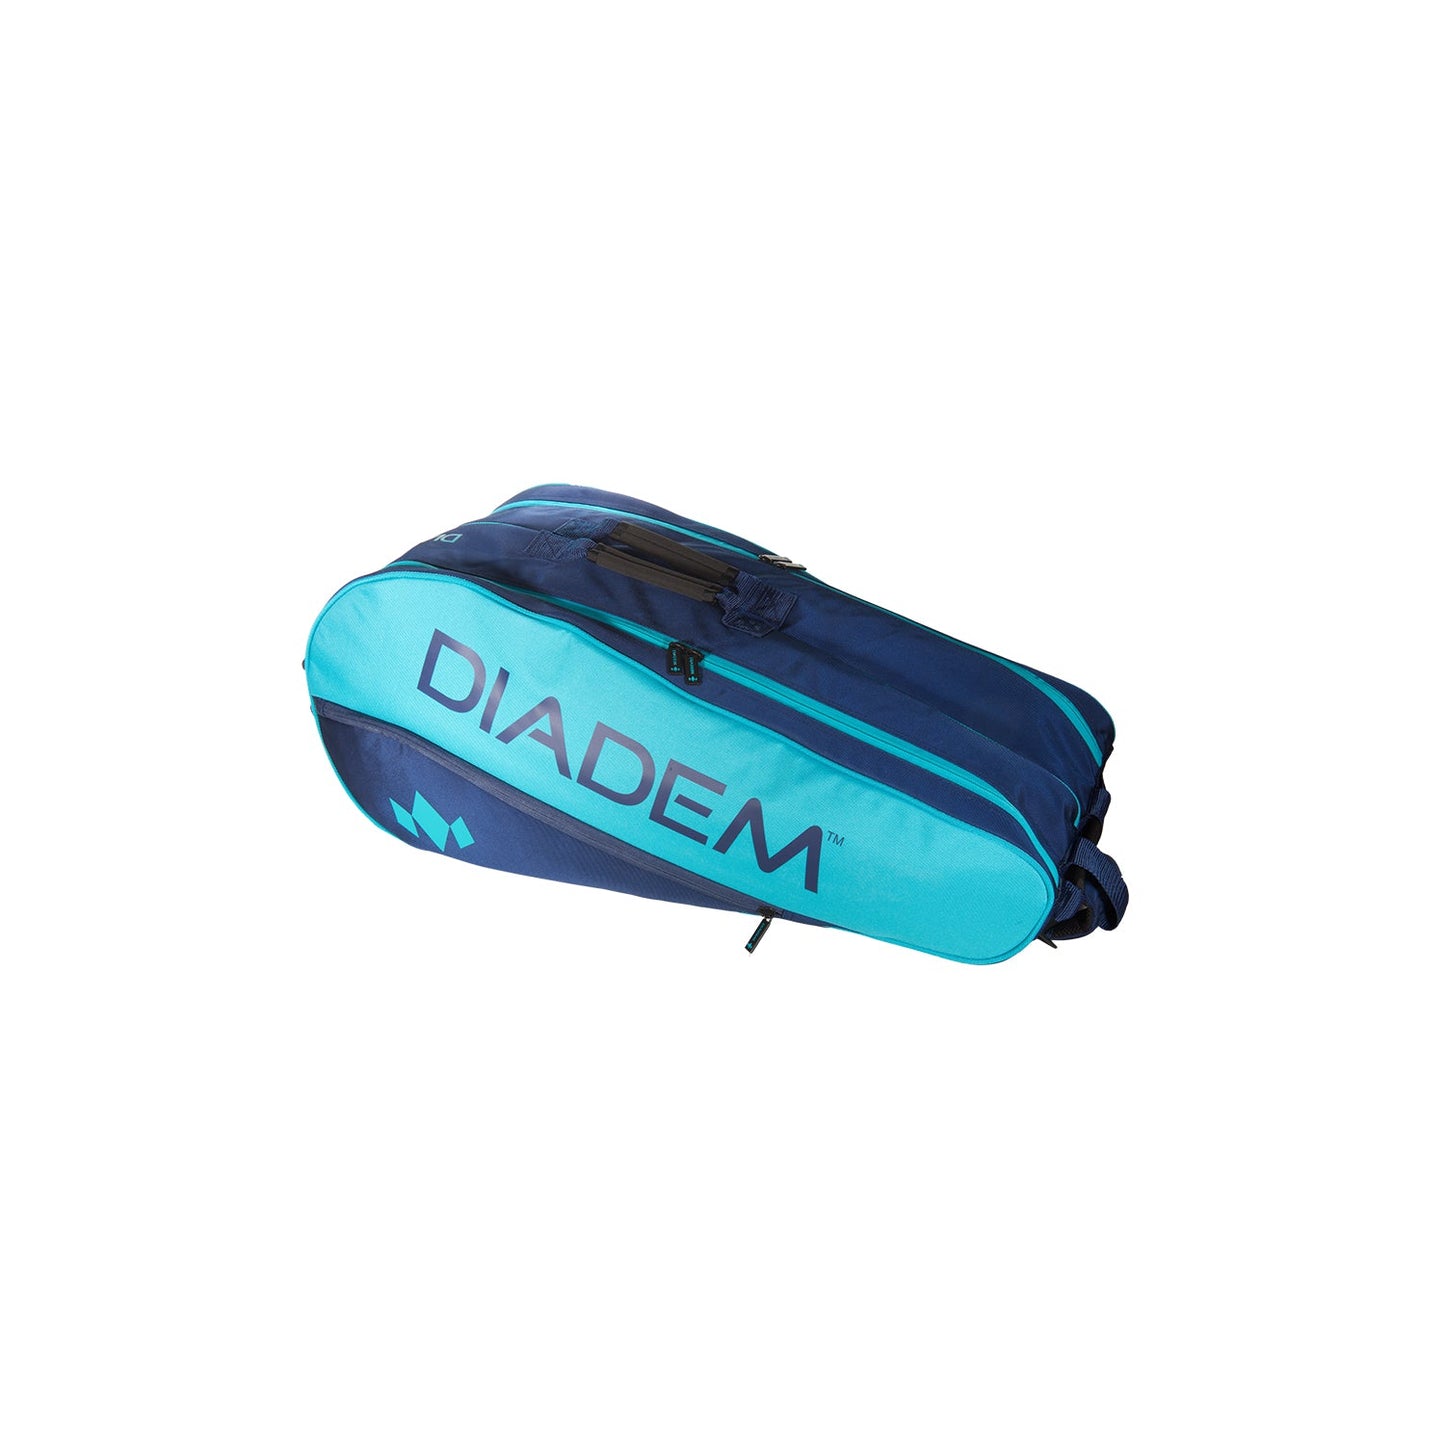 Diadem Tour 9 Pack Elevate Racket Bag (Teal/Navy) by Diadem Sports